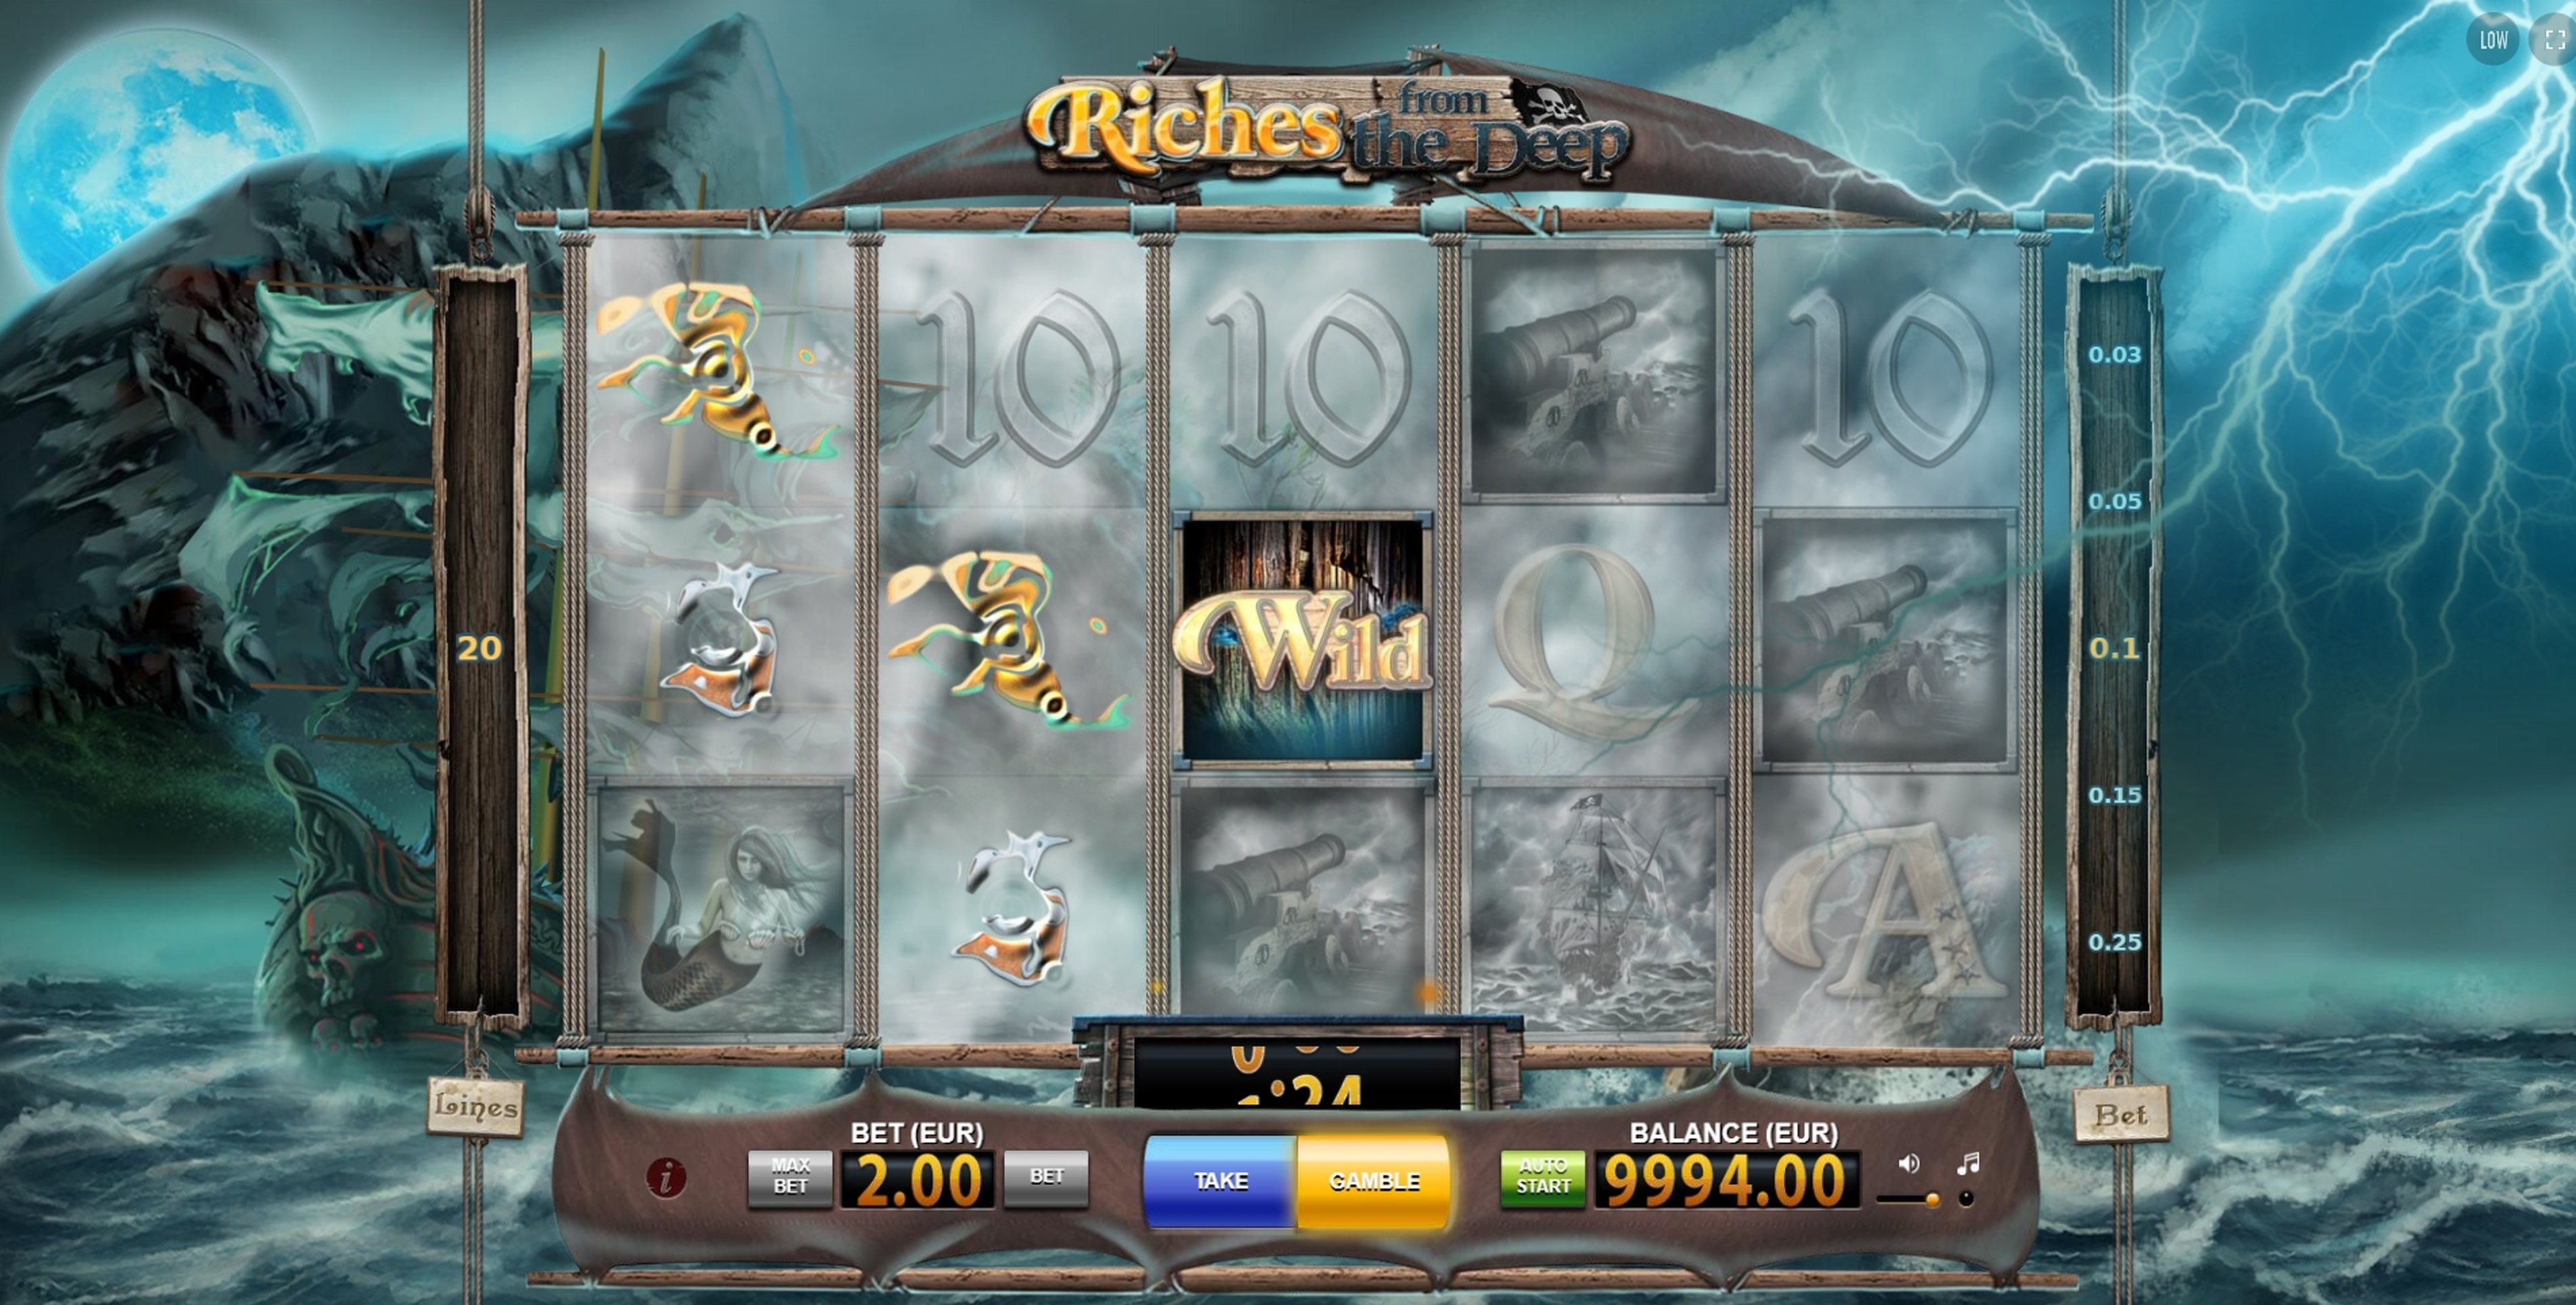 Win Money in Riches from the Deep Free Slot Game by BF Games